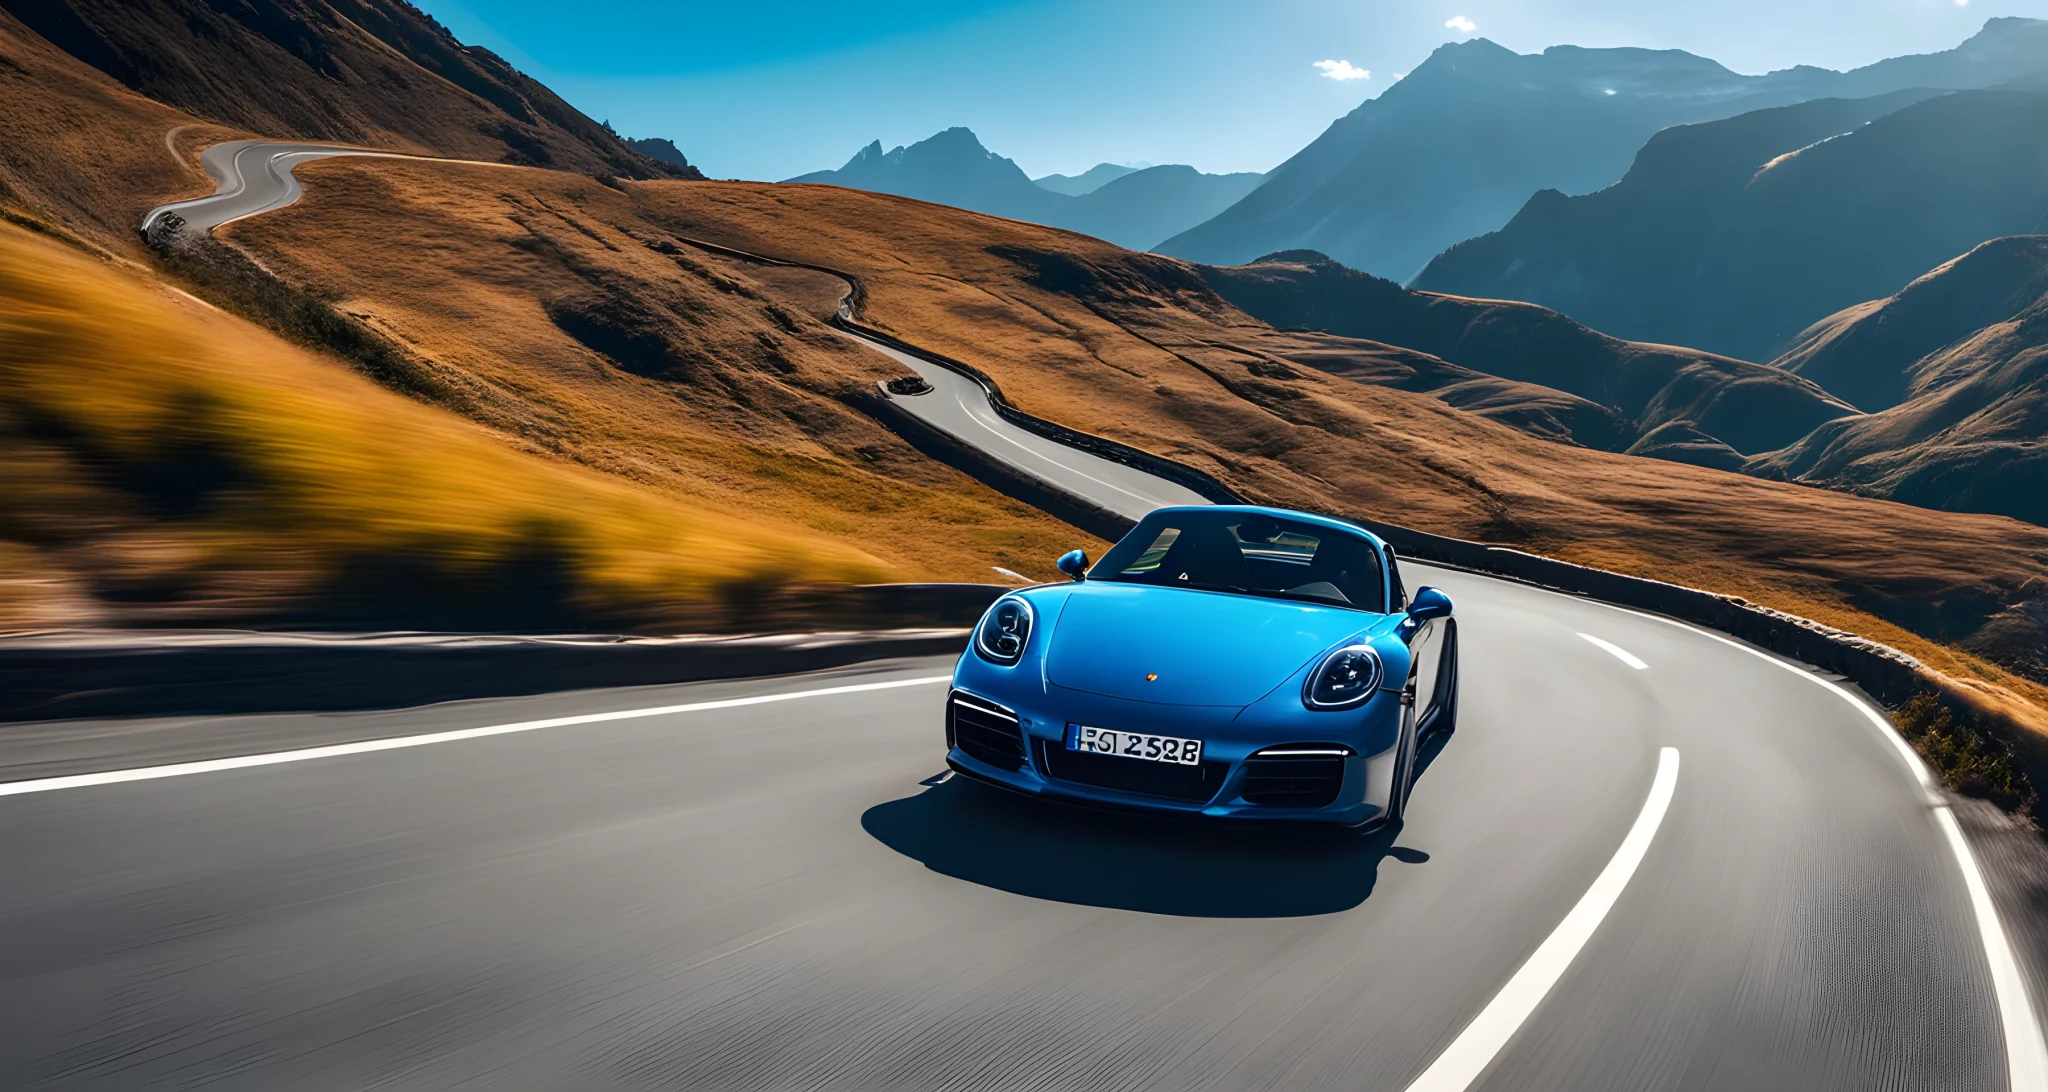 The image shows a winding mountain road with a sleek Porsche sports car driving along it. The background features breathtaking mountain scenery and a clear, blue sky.